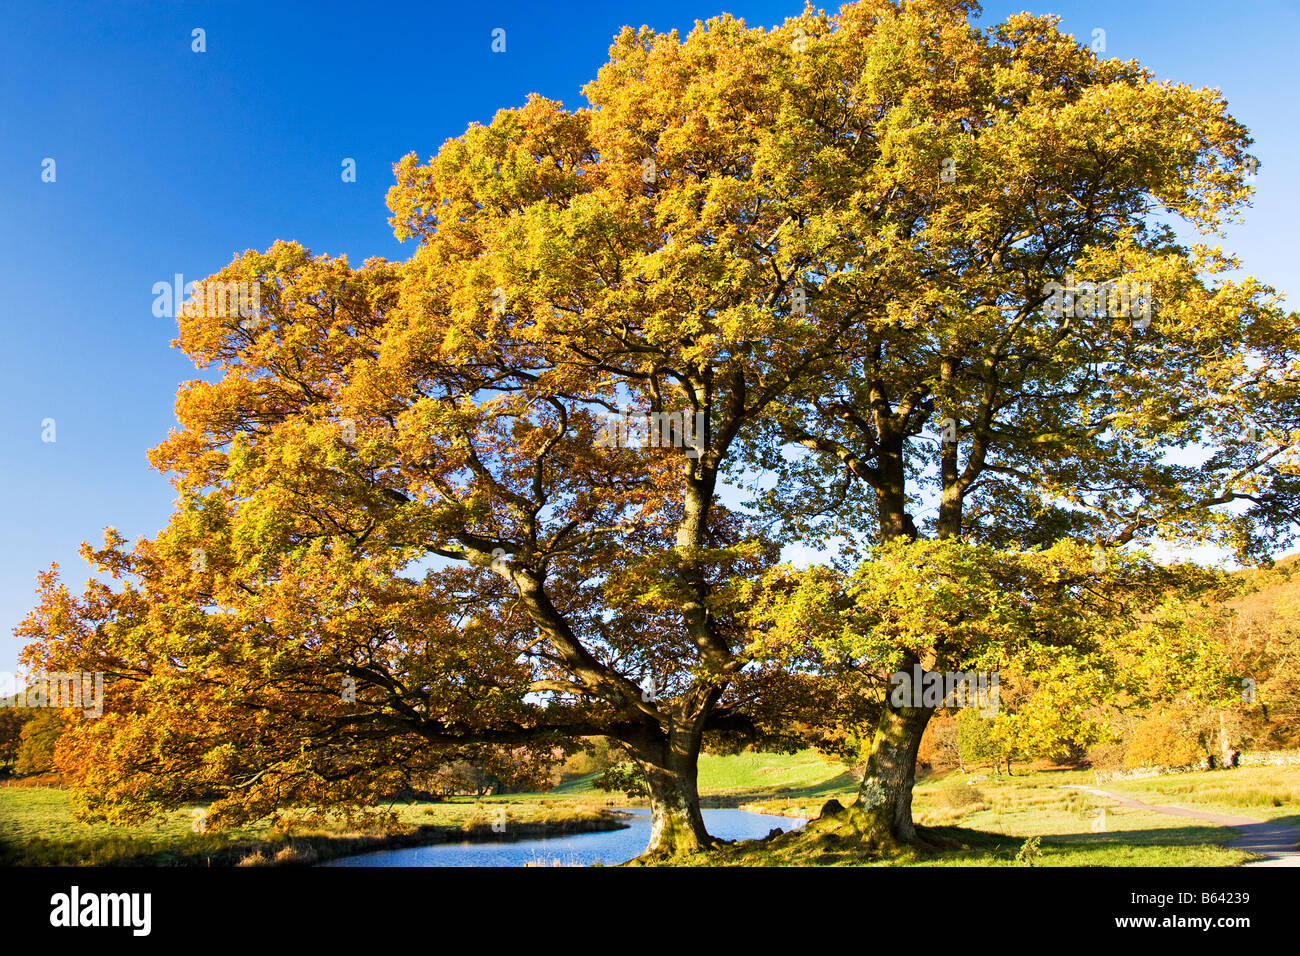 Two trees with autumn foliage on the banks of the River Brathay in the Lake District National Park, Cumbria, England, UK Stock Photo